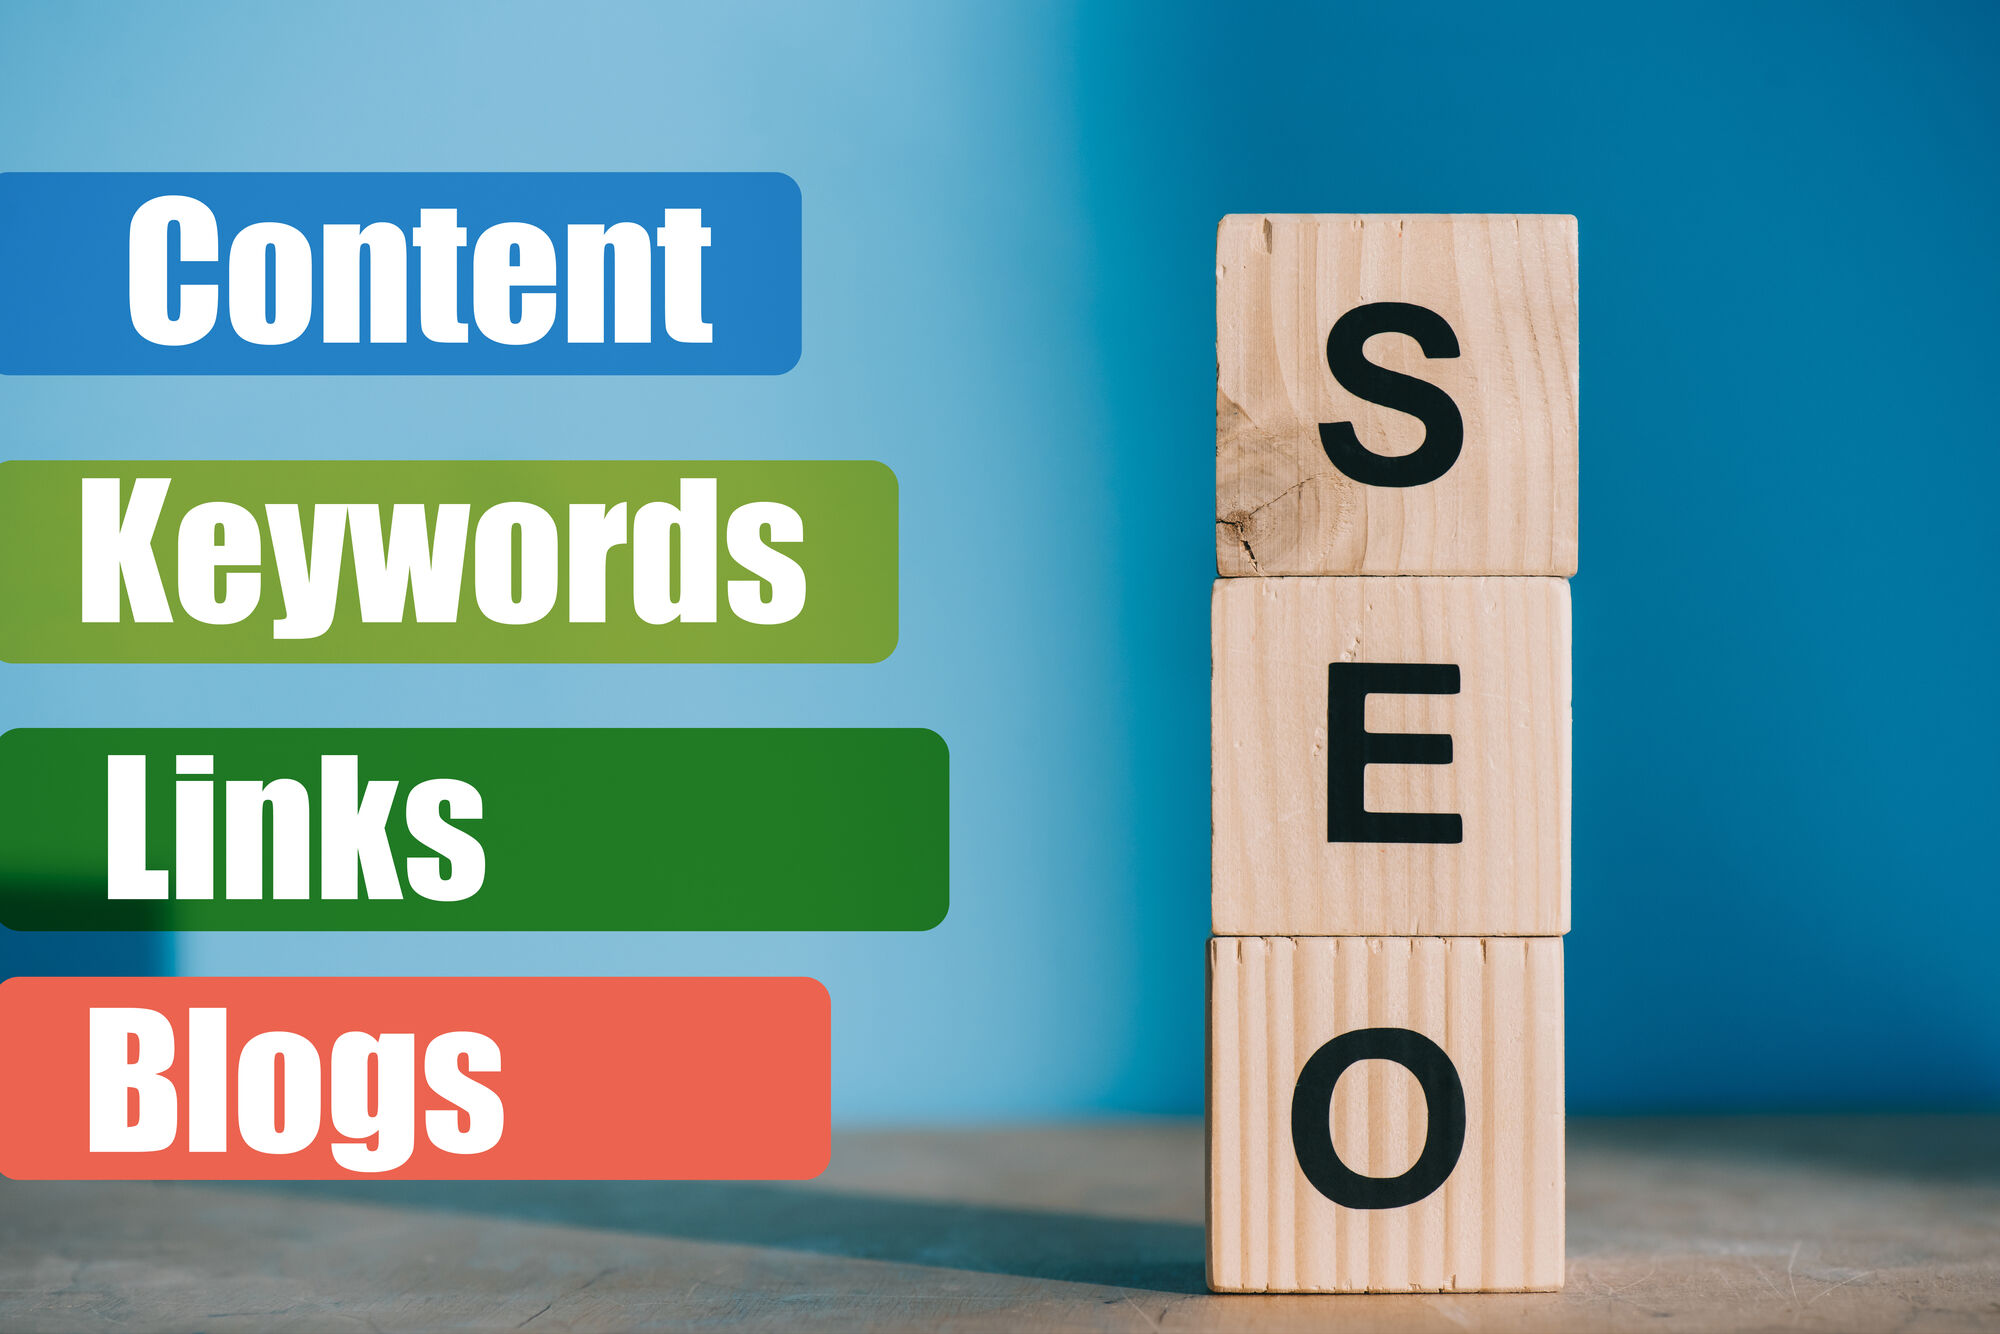 SEO spelled using wooden blocks next to content, keywords, links and blogs signs